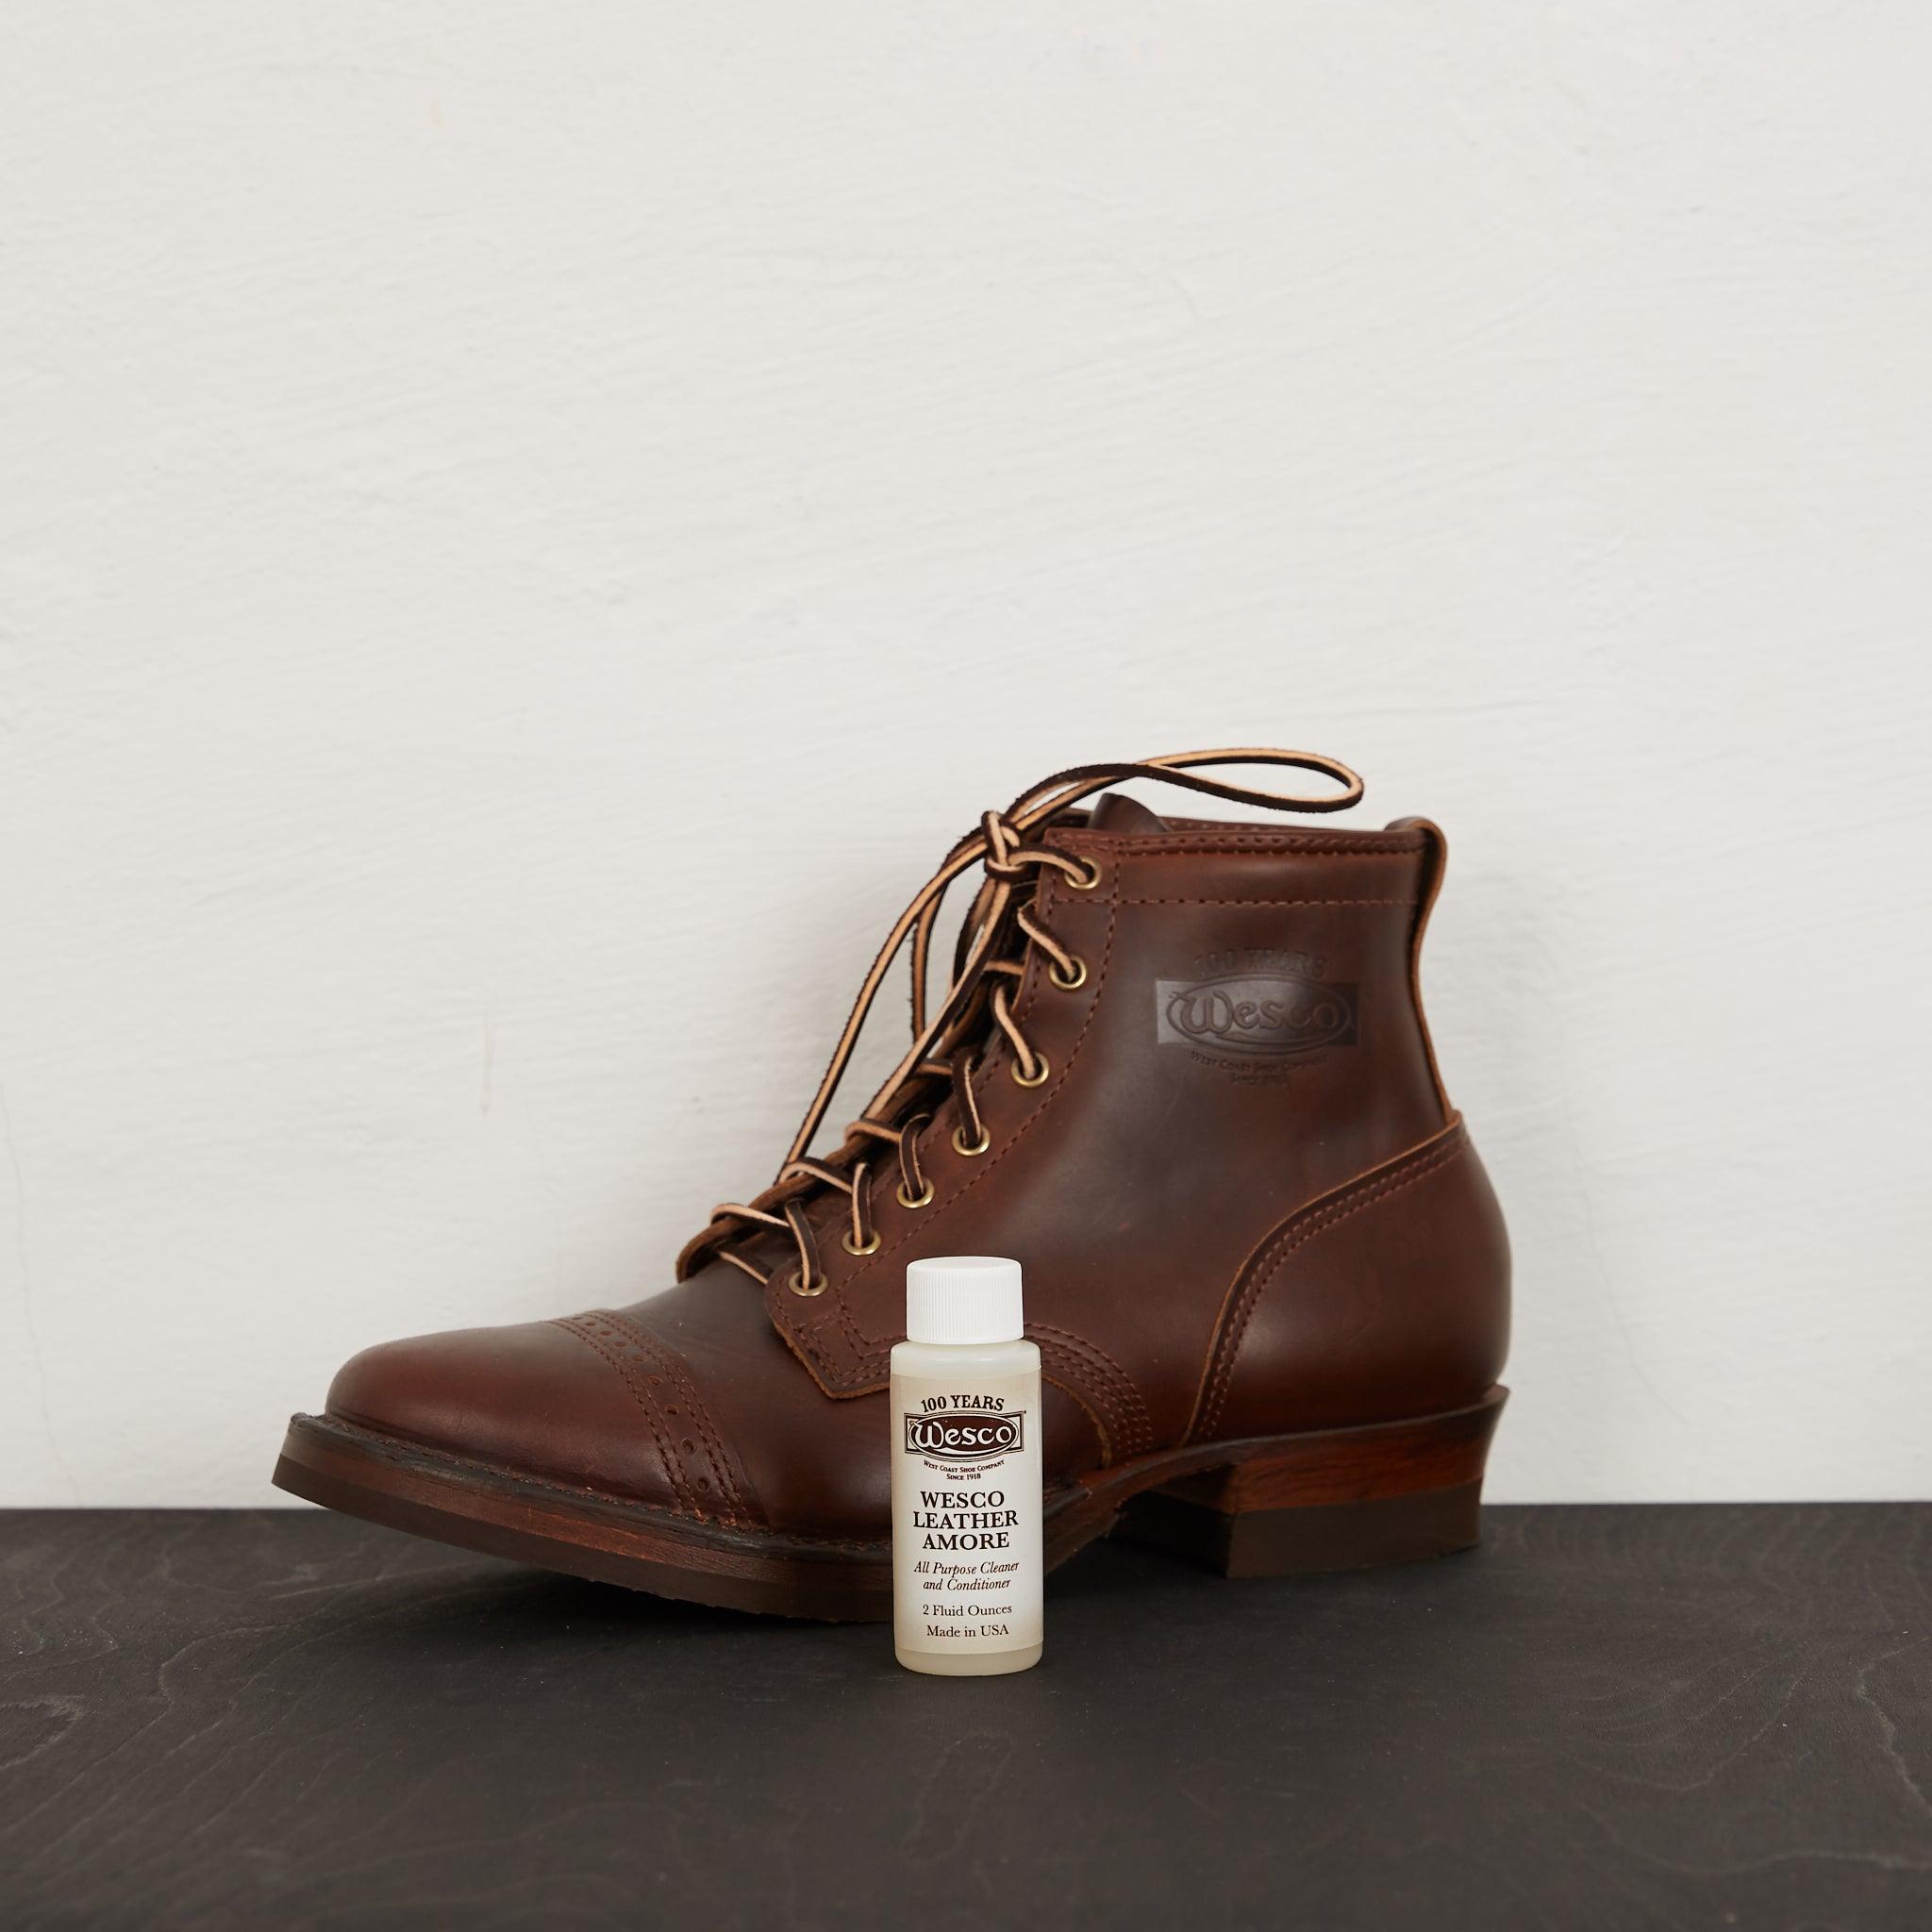 Image showing the Wesco Leather Boot Dressing Leather Amore which is a Shoecare described by the following info Footwear, Shoecare, Wesco and sold on the IRON HEART GERMANY online store